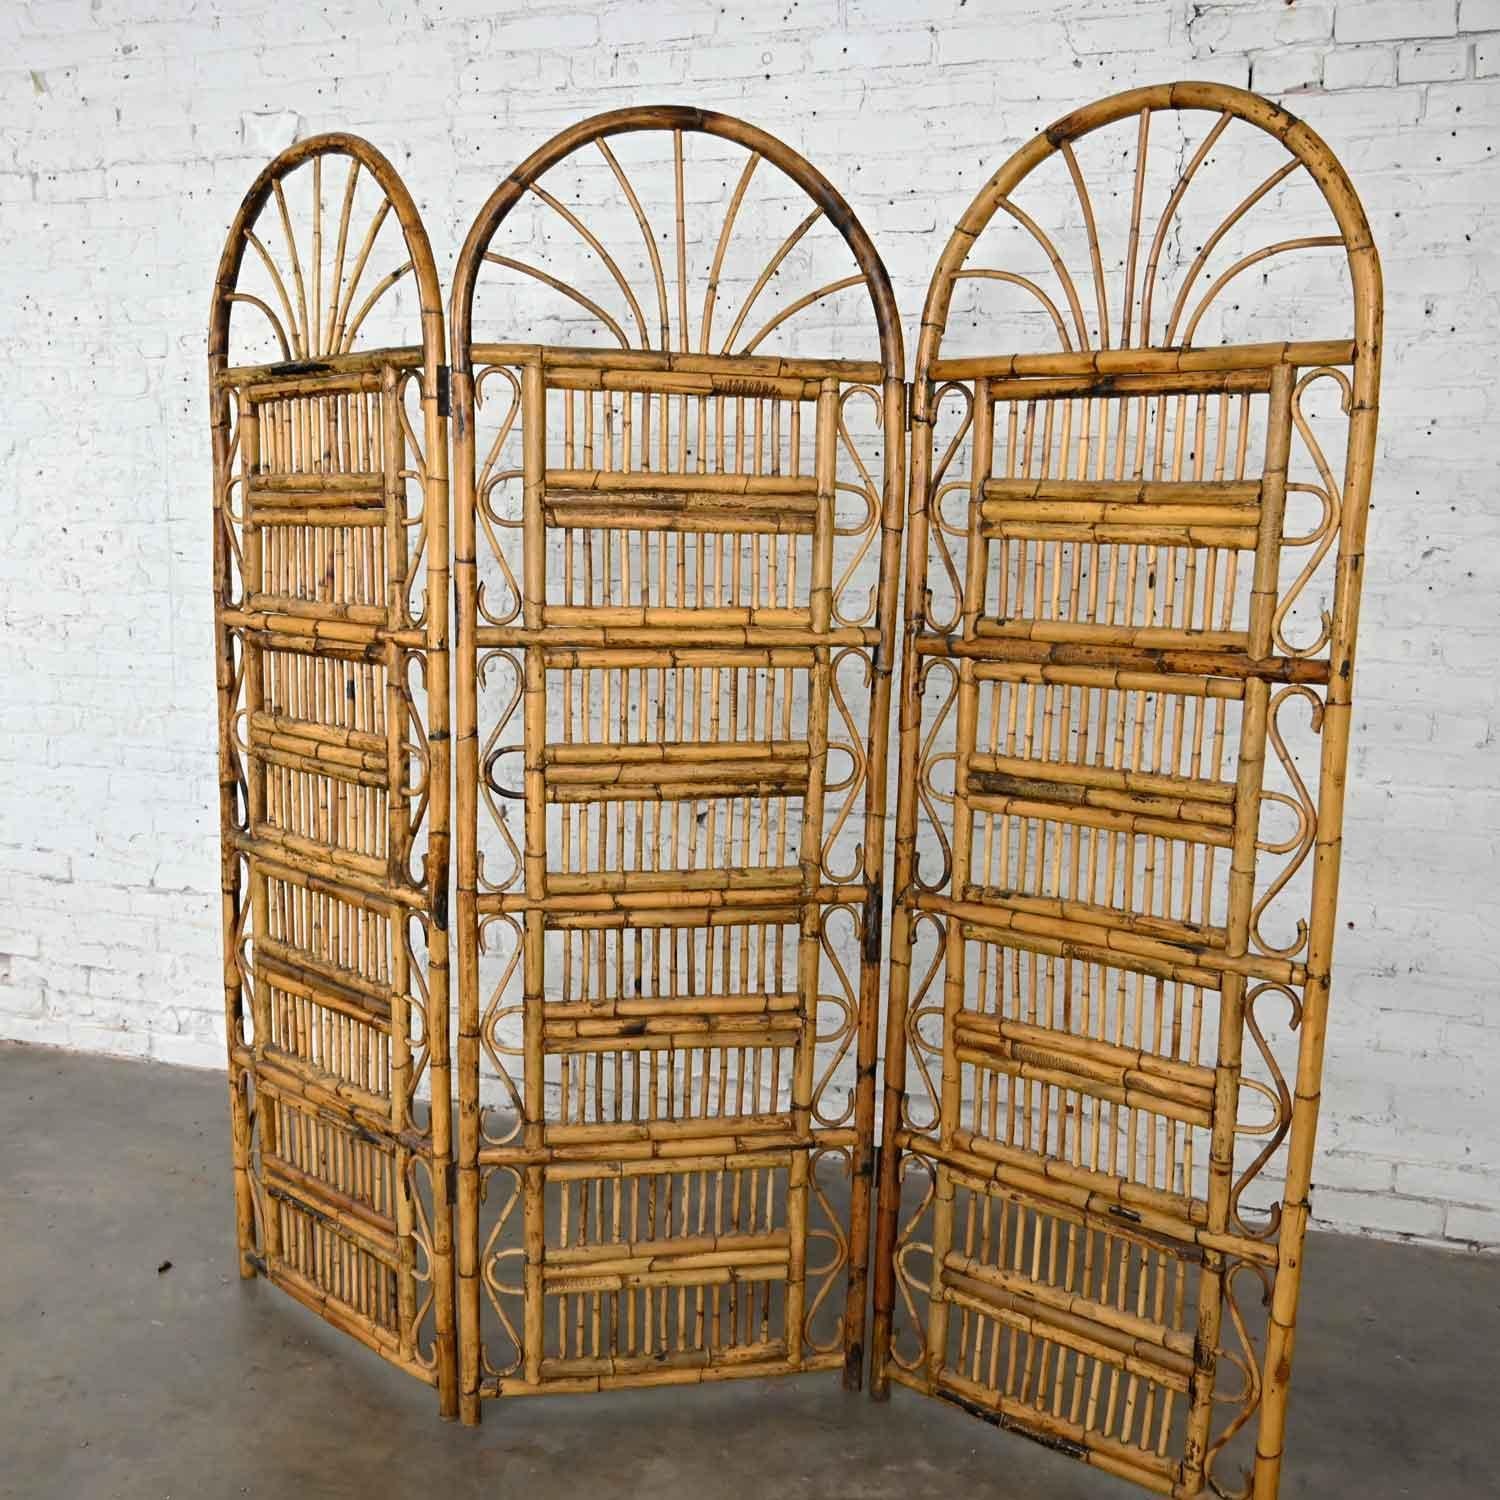 Gorgeous vintage Hollywood Regency & Organic Modern rattan three panel folding screen with arched tops, brass plated hinges, and serpentine loop details on the edges. Beautiful condition, keeping in mind that this is vintage and not new so will have